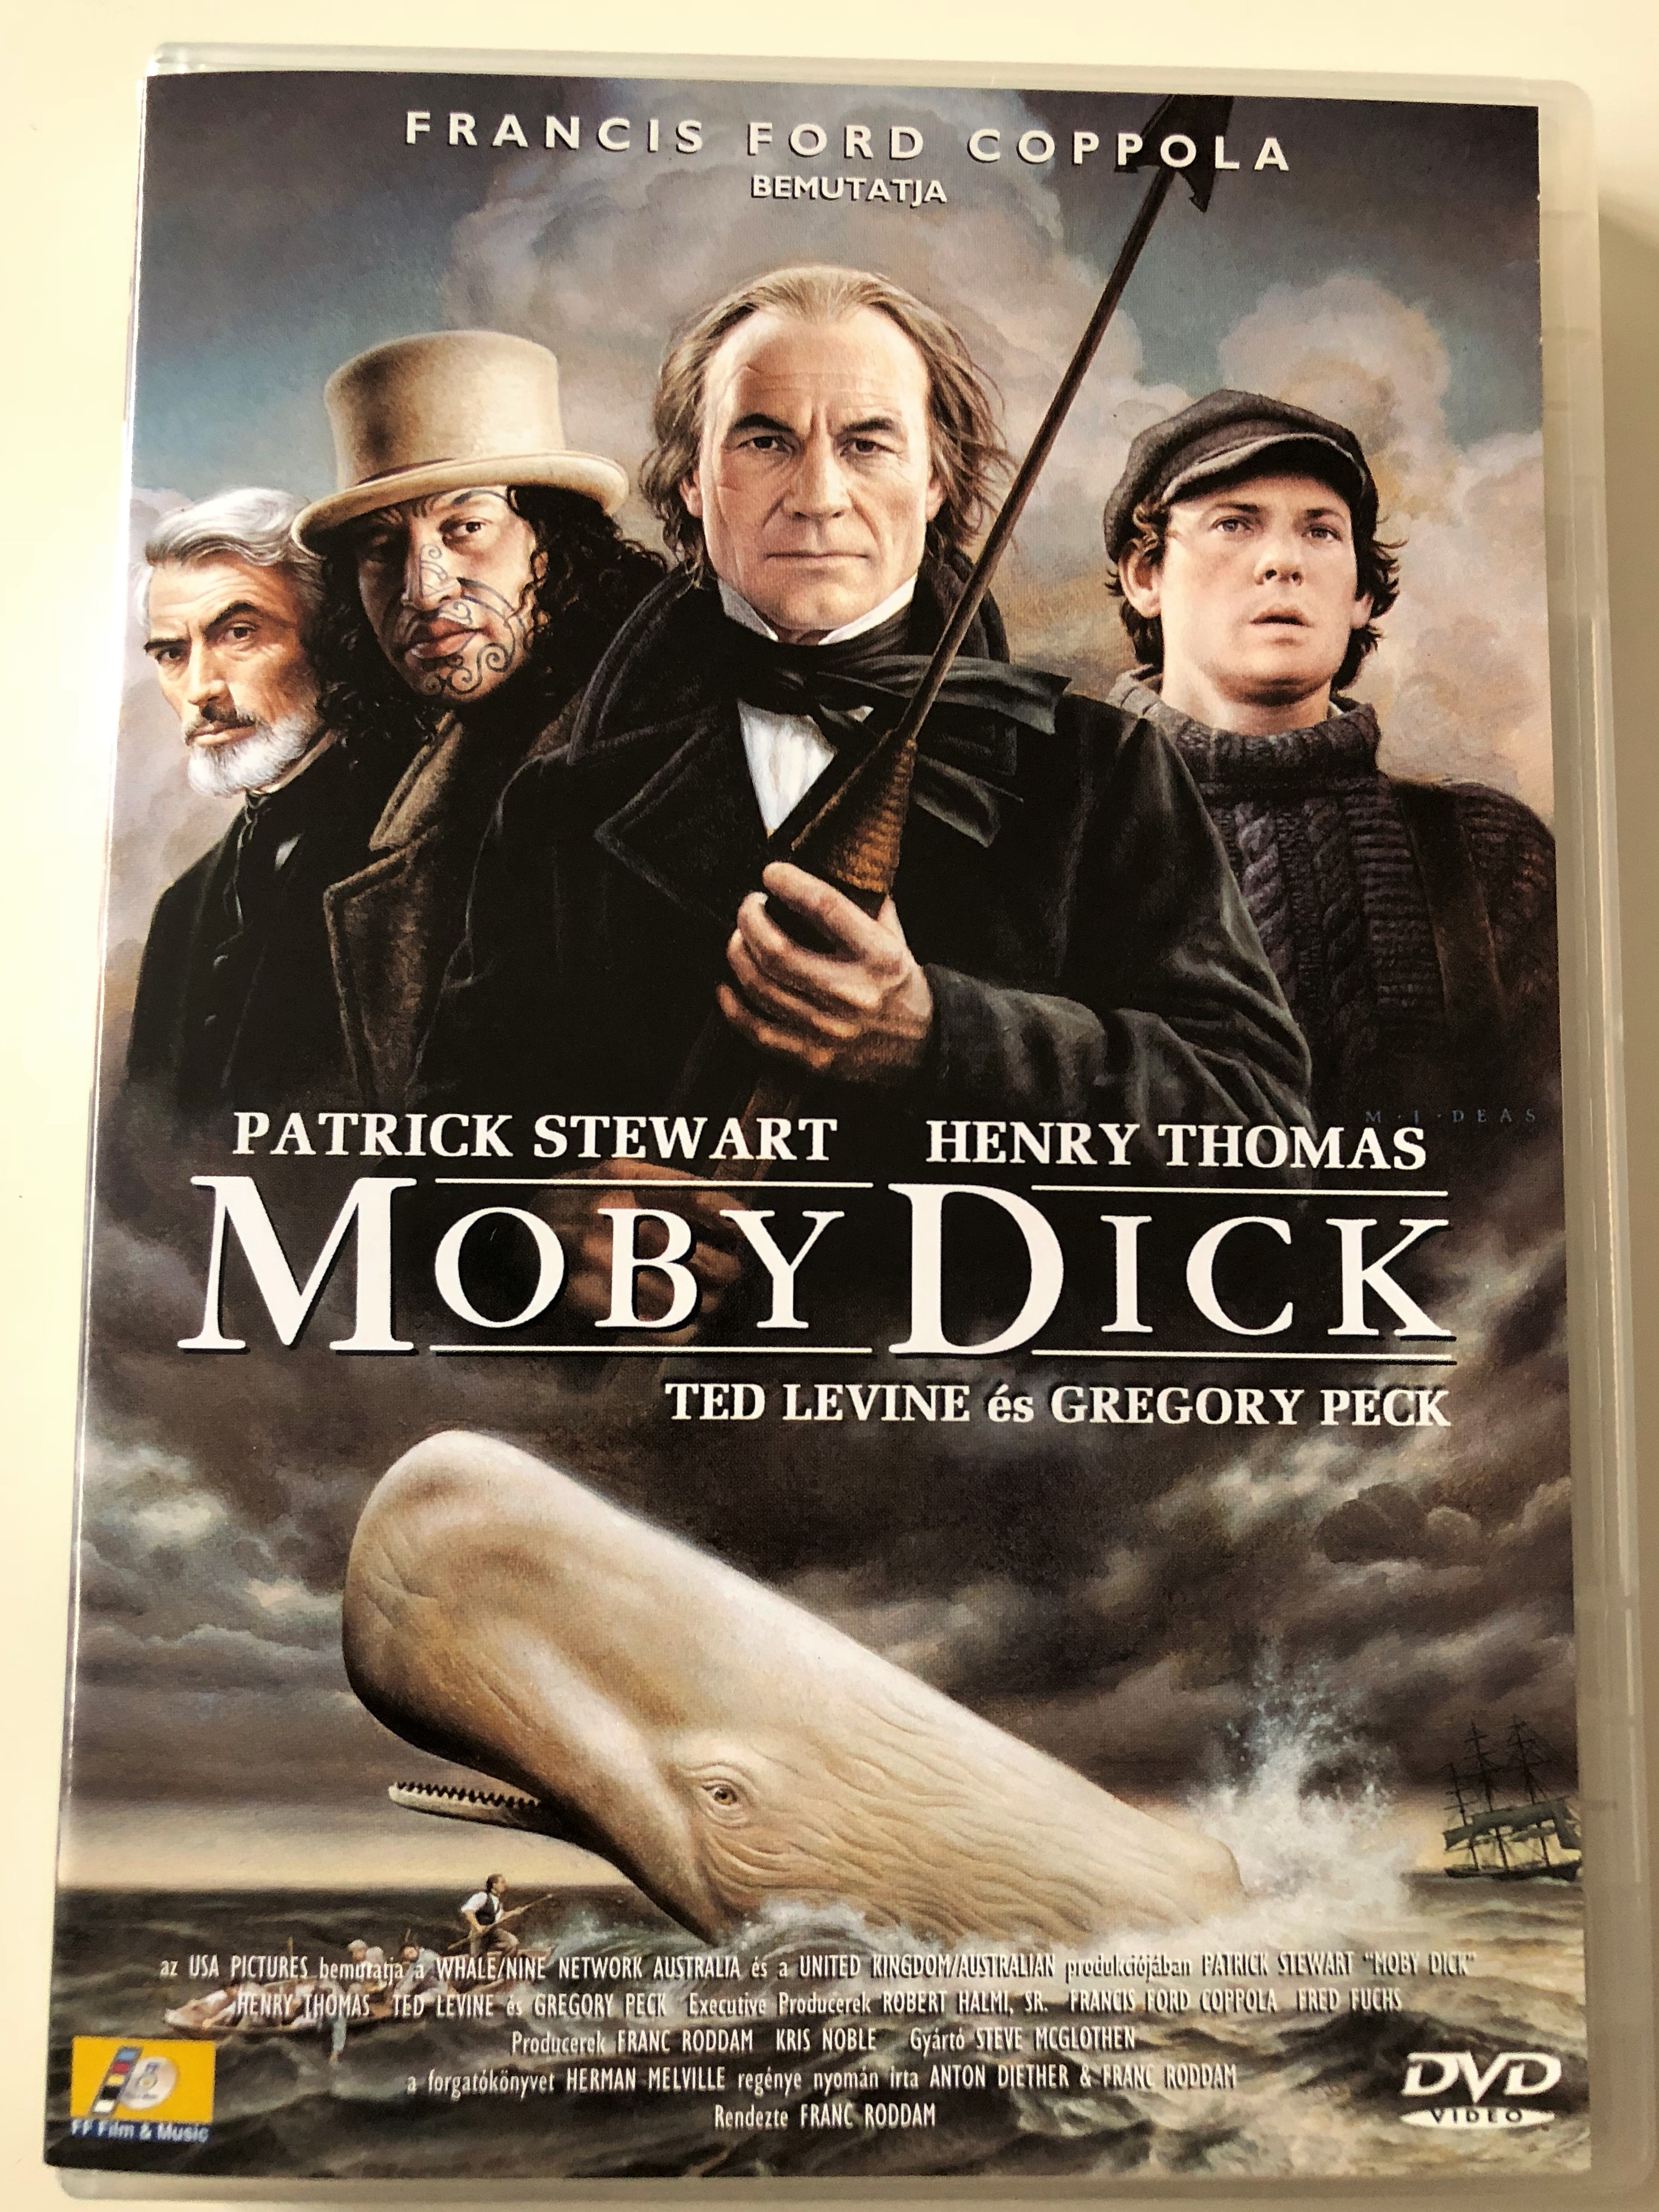 moby-dick-dvd-1998-directed-by-franc-roddam-starring-patrick-stewart-henry-tomas-gregory-peck-produced-by-francis-ford-coppola-1-.jpg